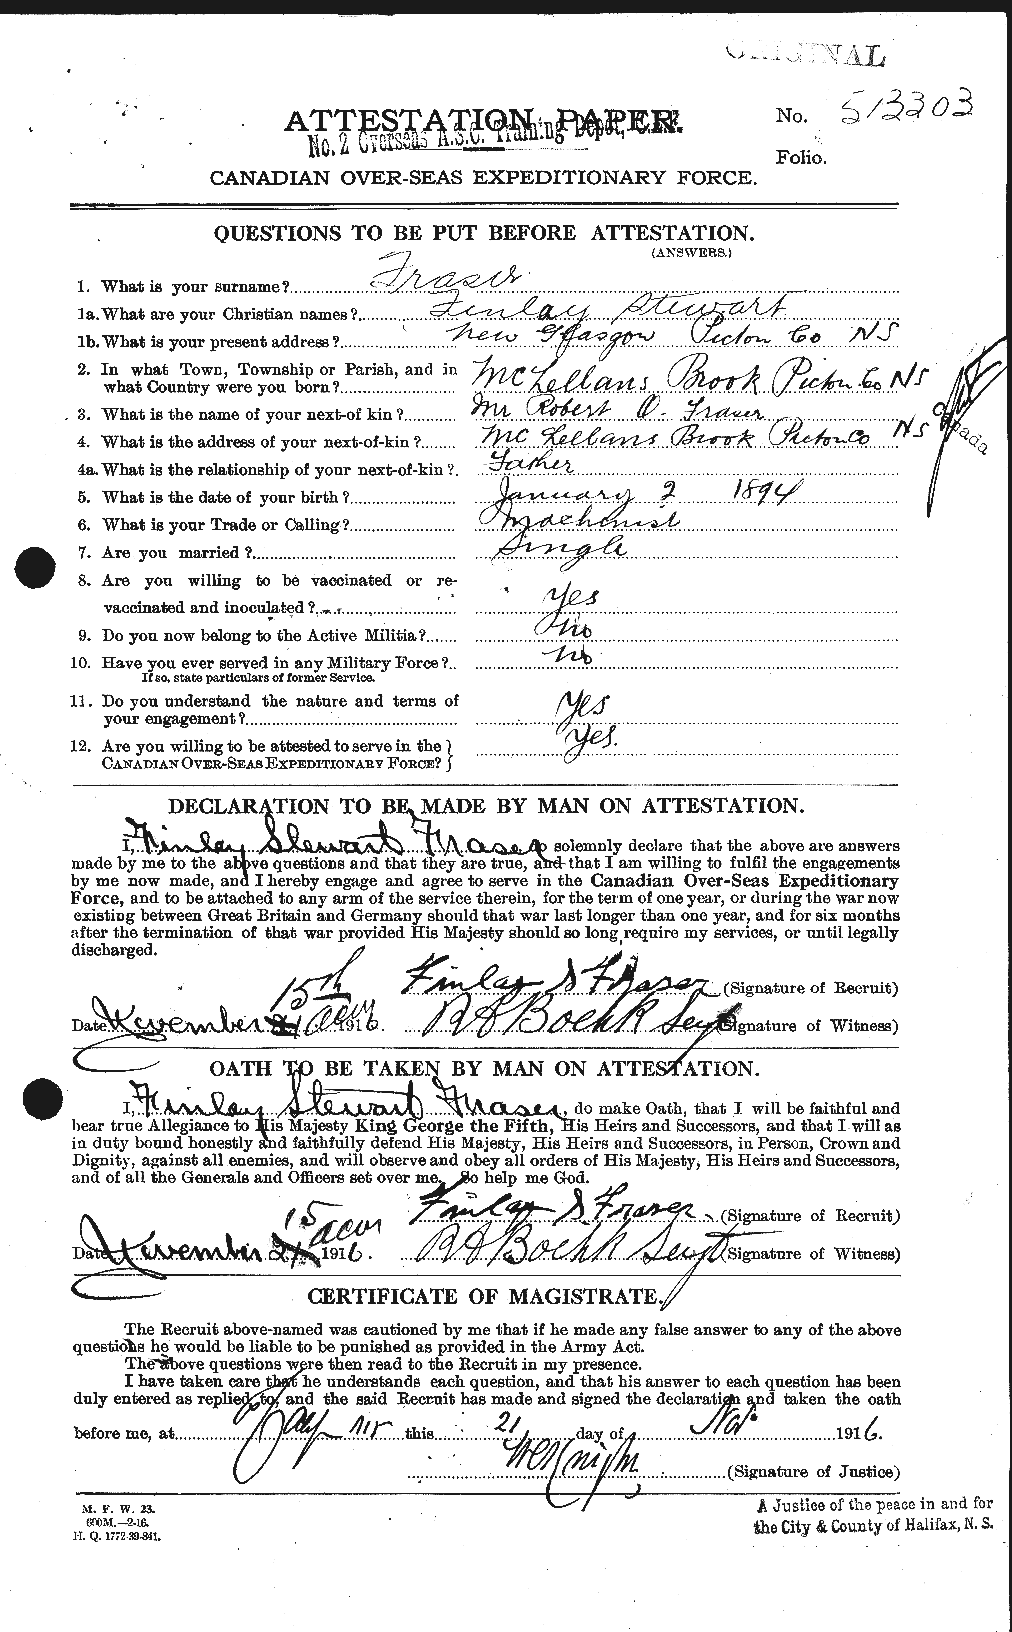 Personnel Records of the First World War - CEF 336284a